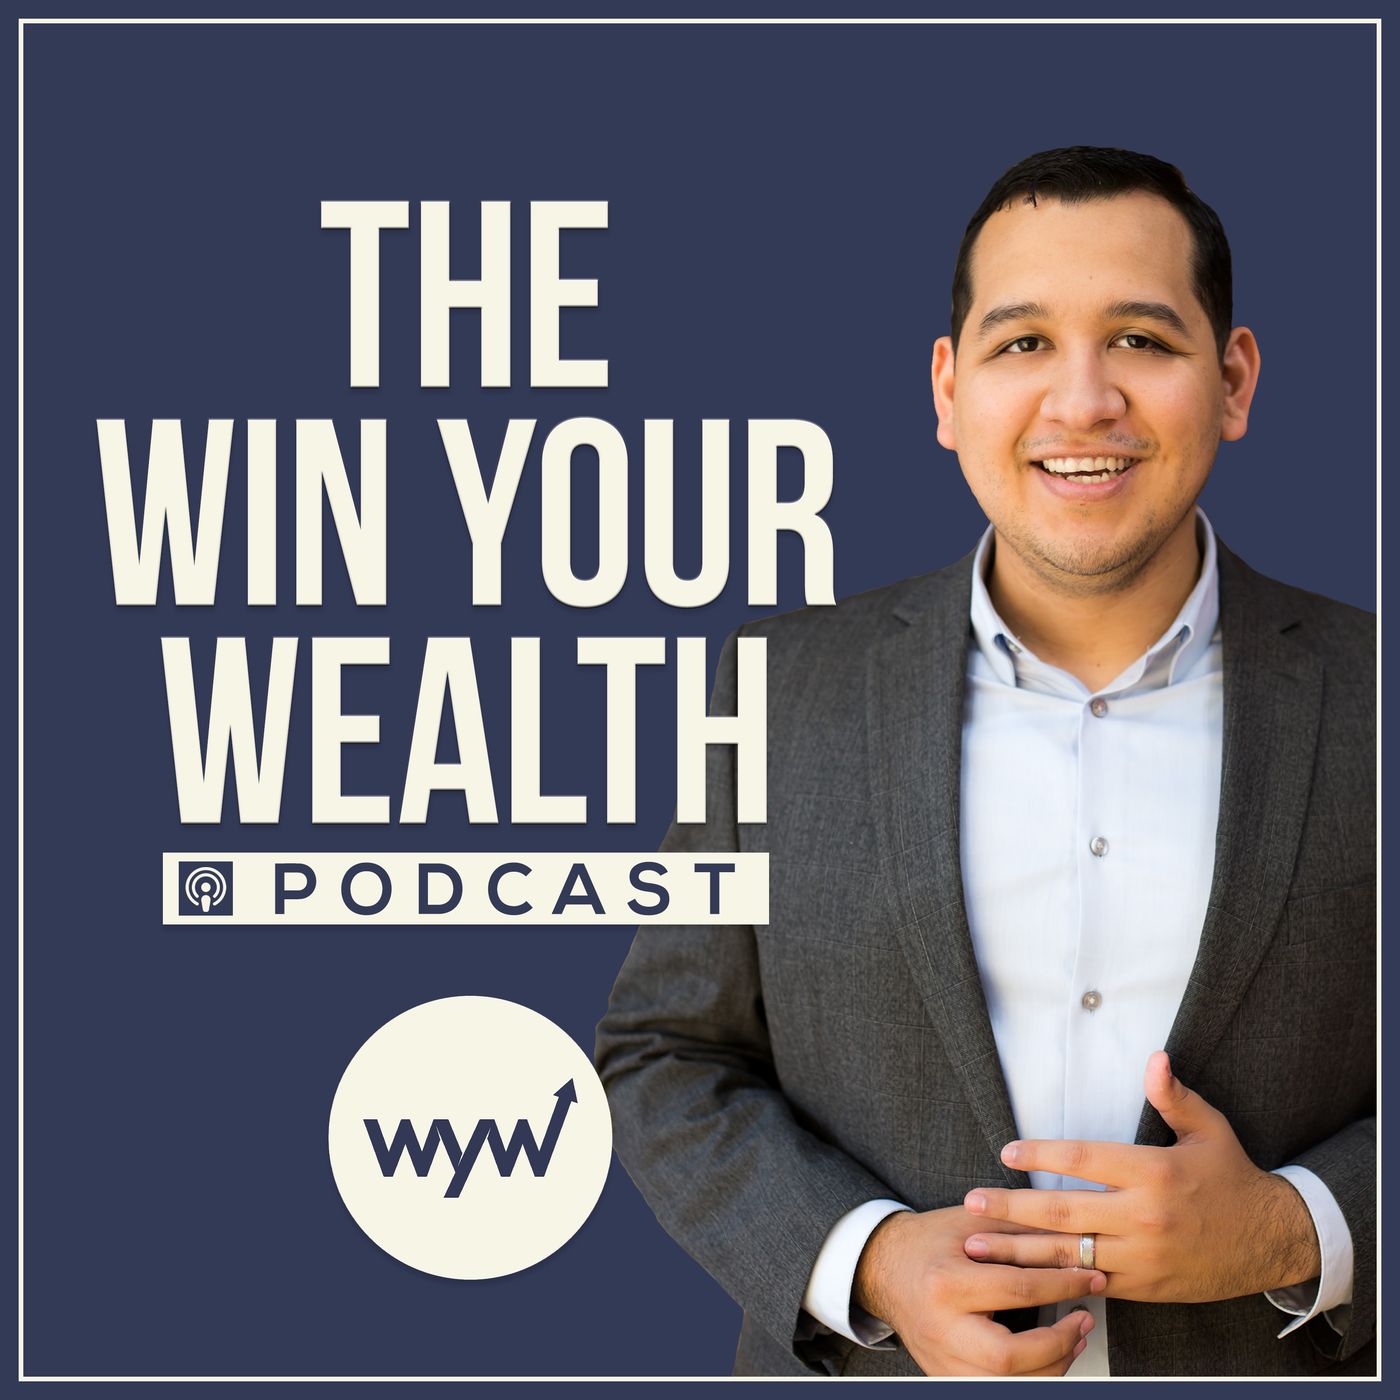 The Win Your Wealth Podcast